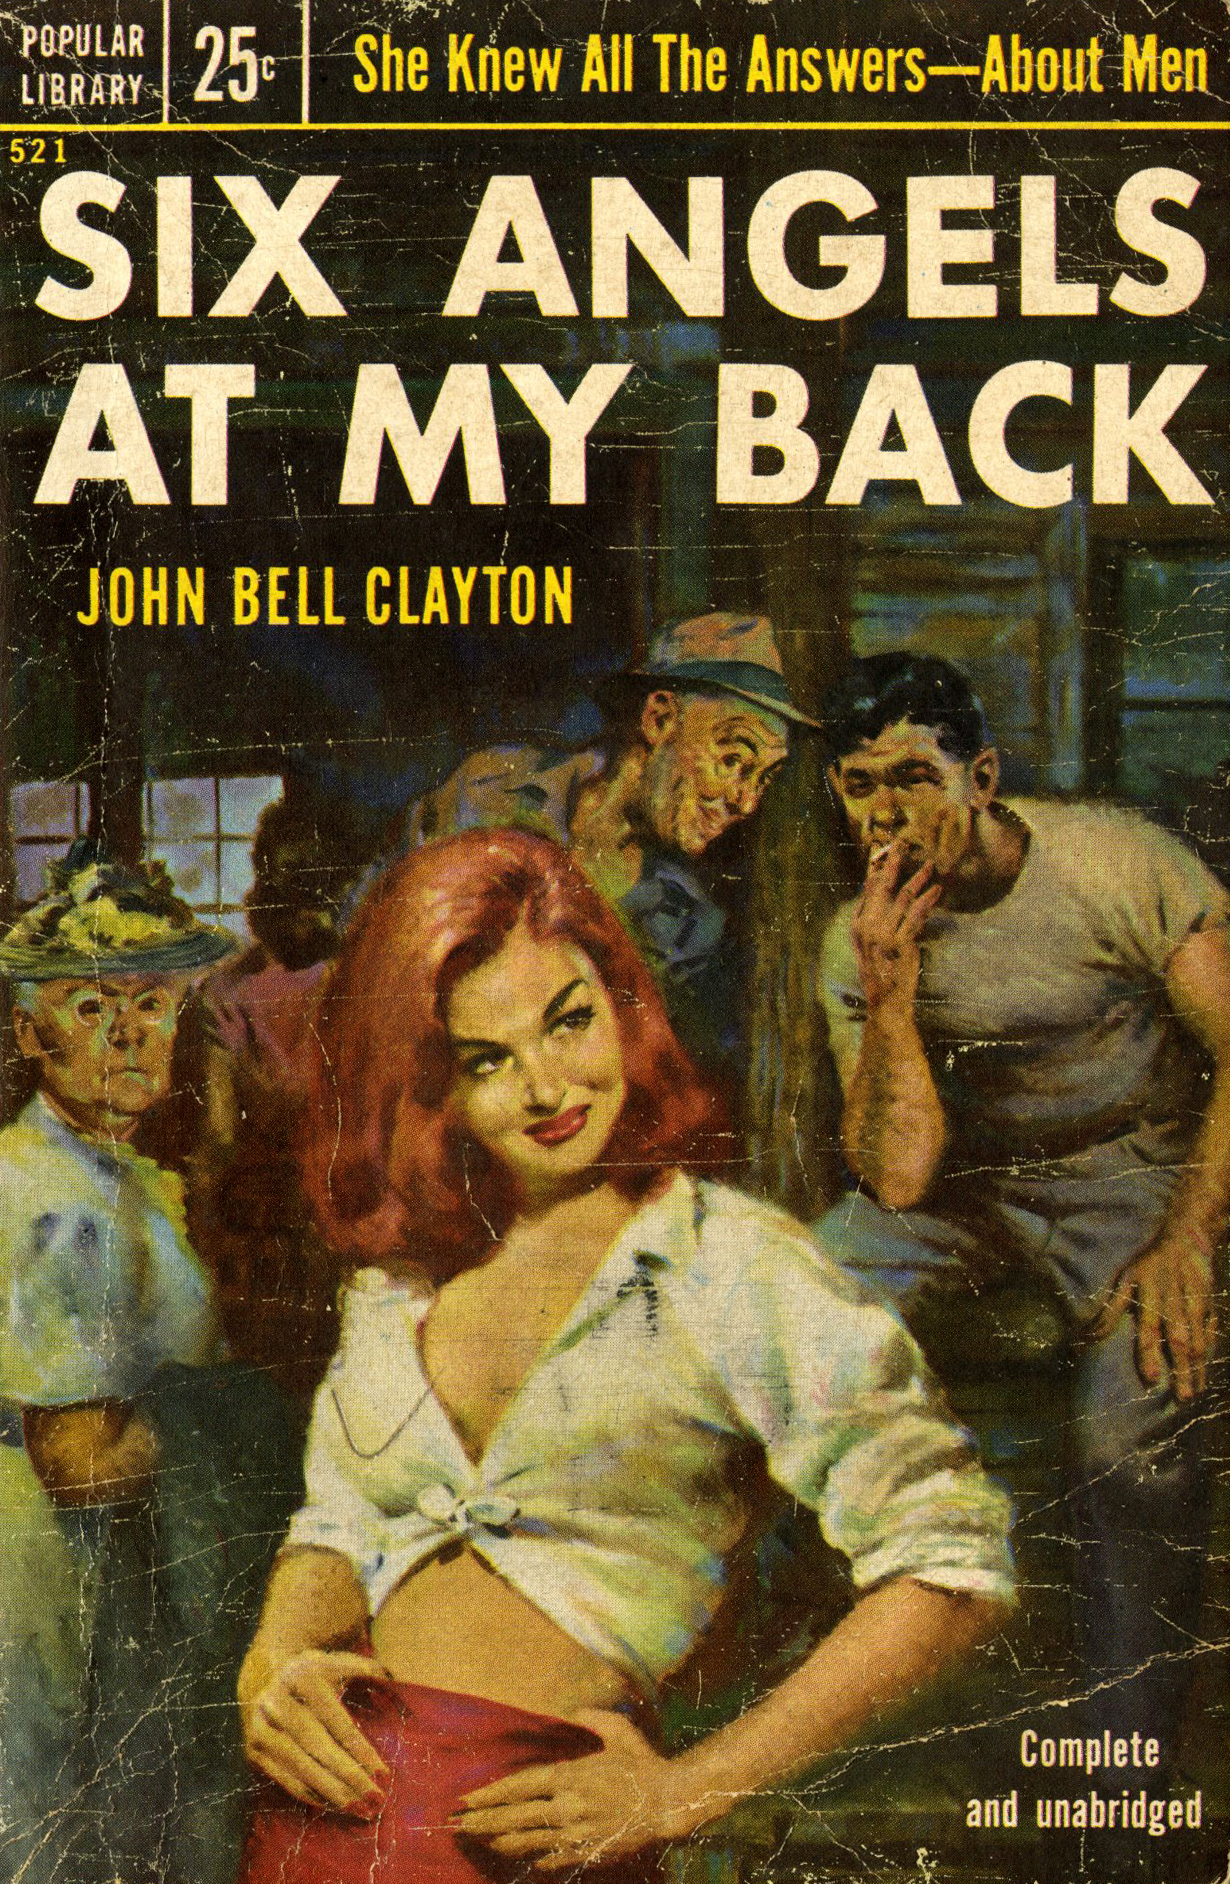 Cover of John Bell Clayton's Six Angels at My Back, 1953